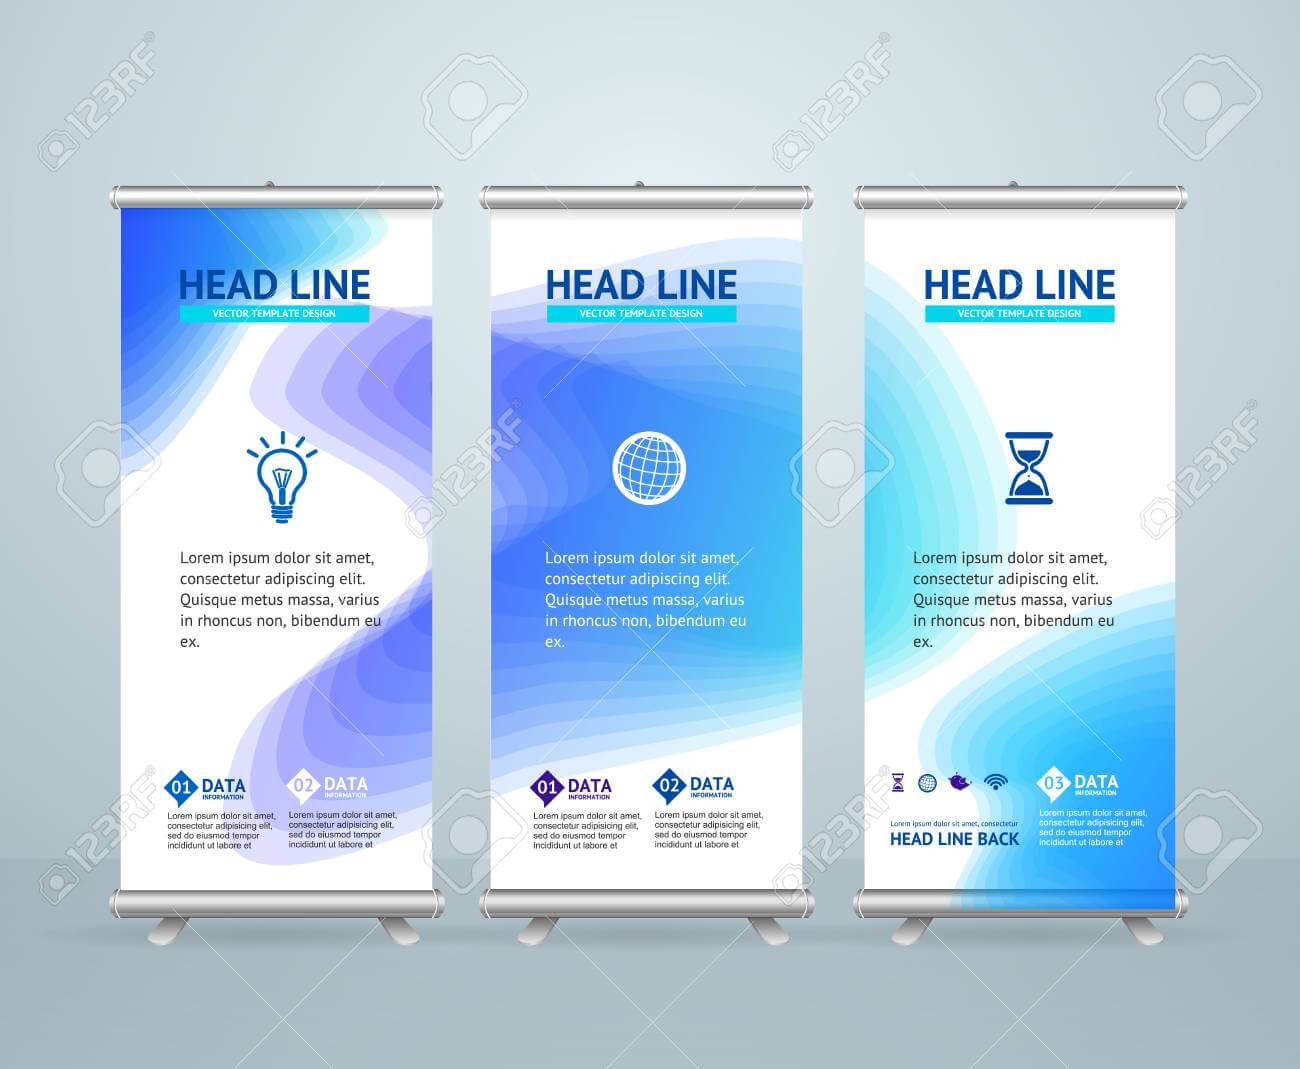 Roll Up Banner Stand Design Template With Abstract Colorful Shapes.. Intended For Banner Stand Design Templates